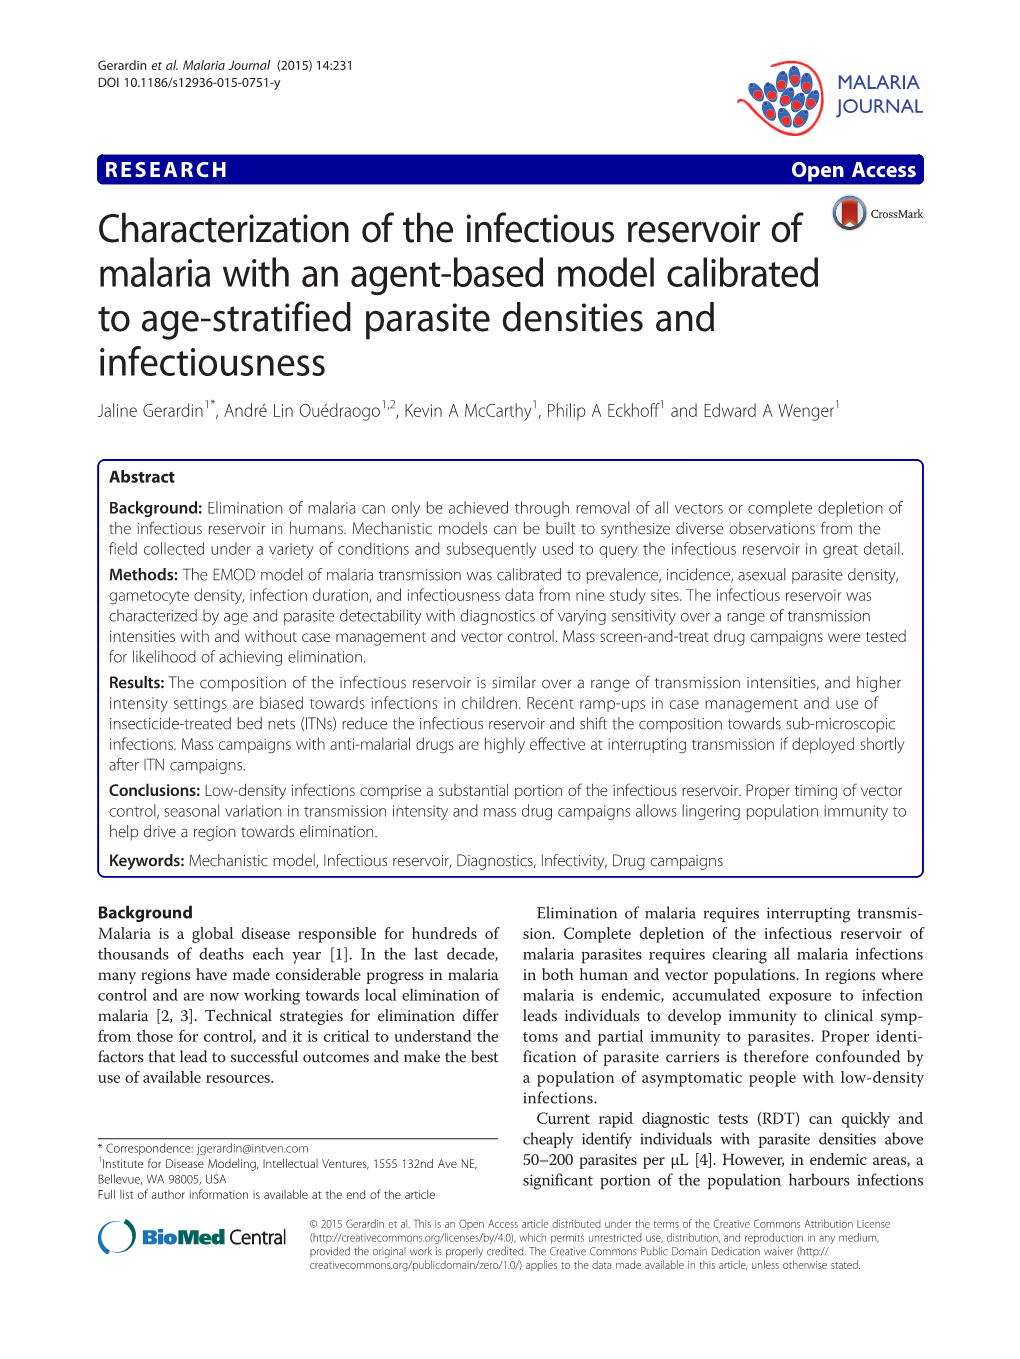 Characterization of the Infectious Reservoir of Malaria with an Agent